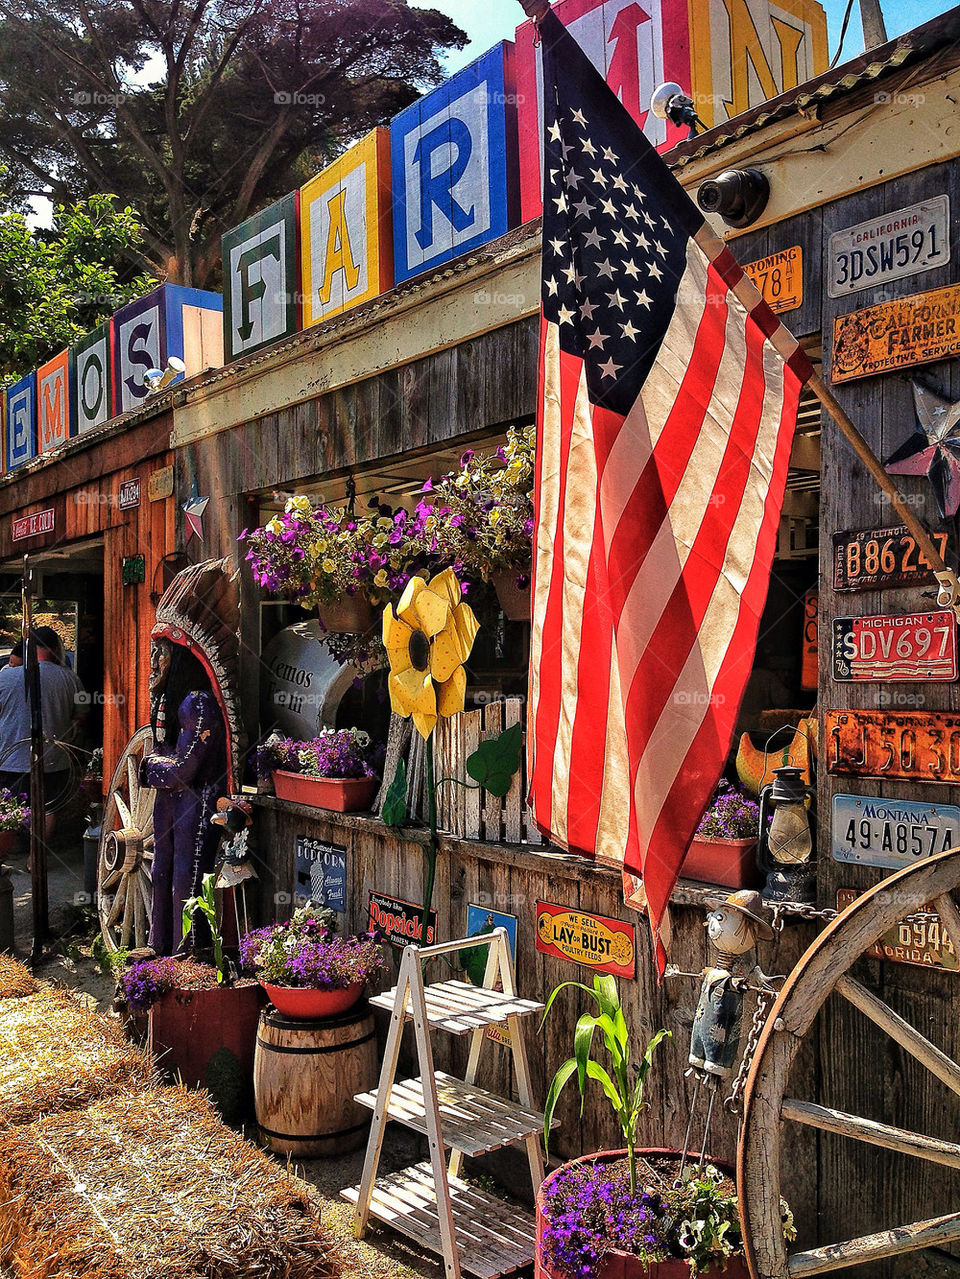 American flag and Americana knickknacks at an old west storefront